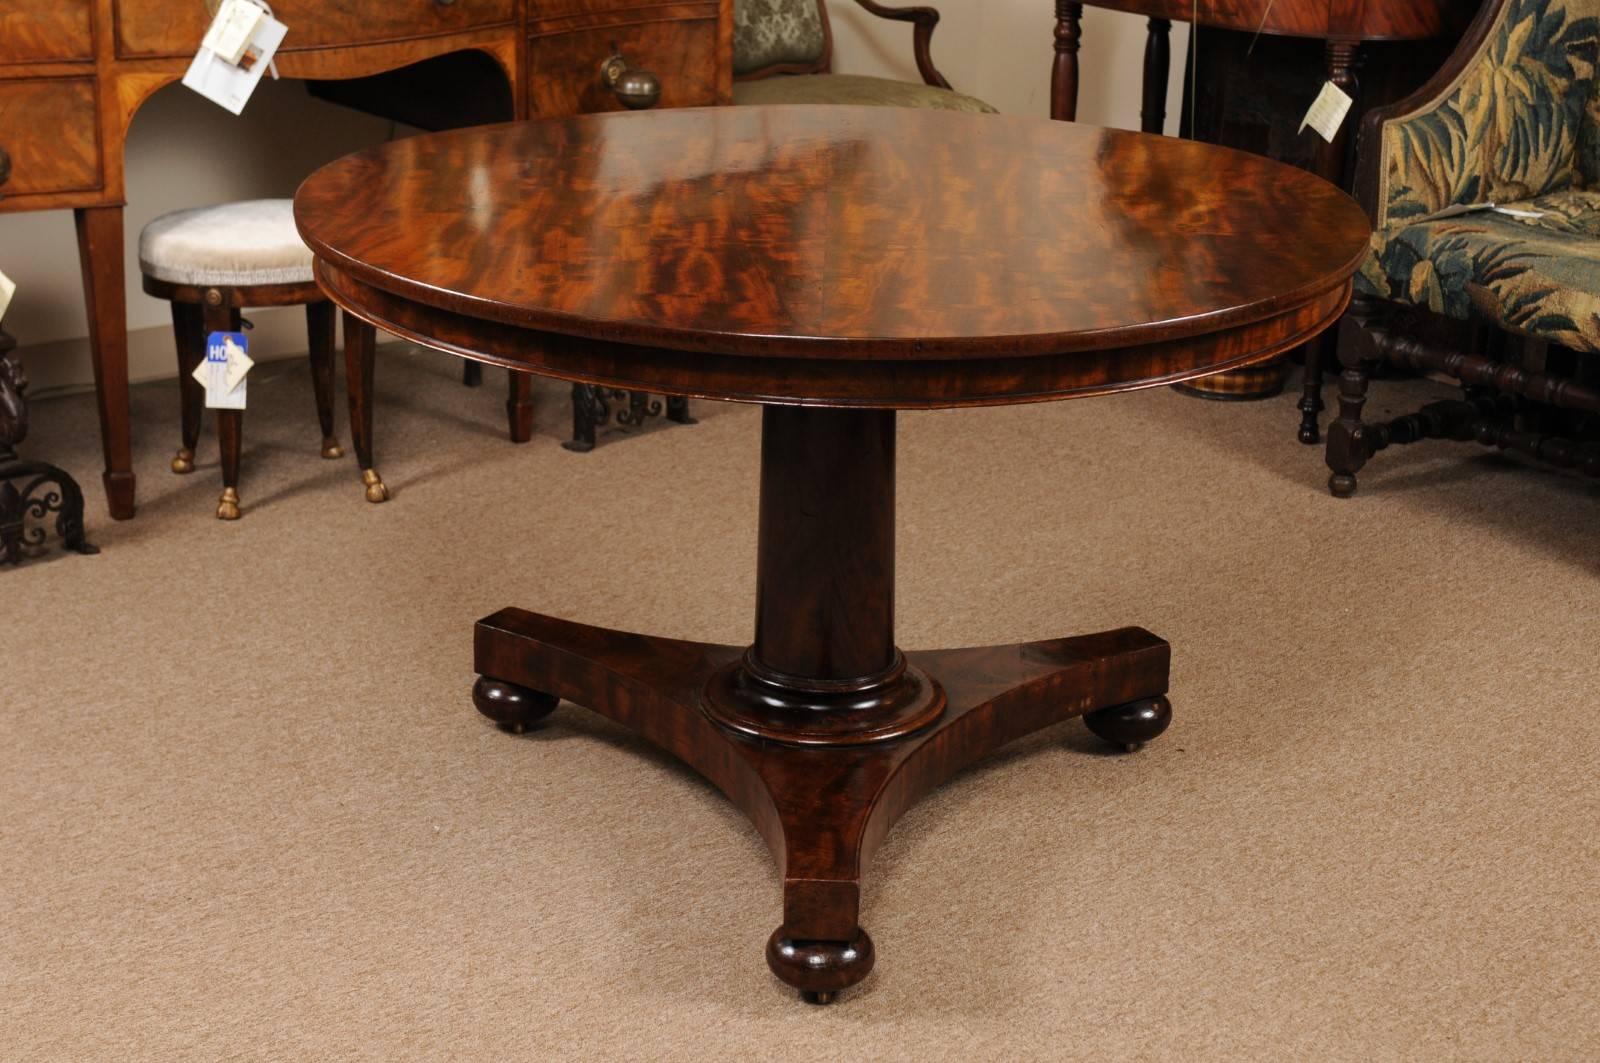 The William IV English mahogany centre table with highly figured grain circular top resting on pedestal base and bun feet. The table with tilting mechanism.

 